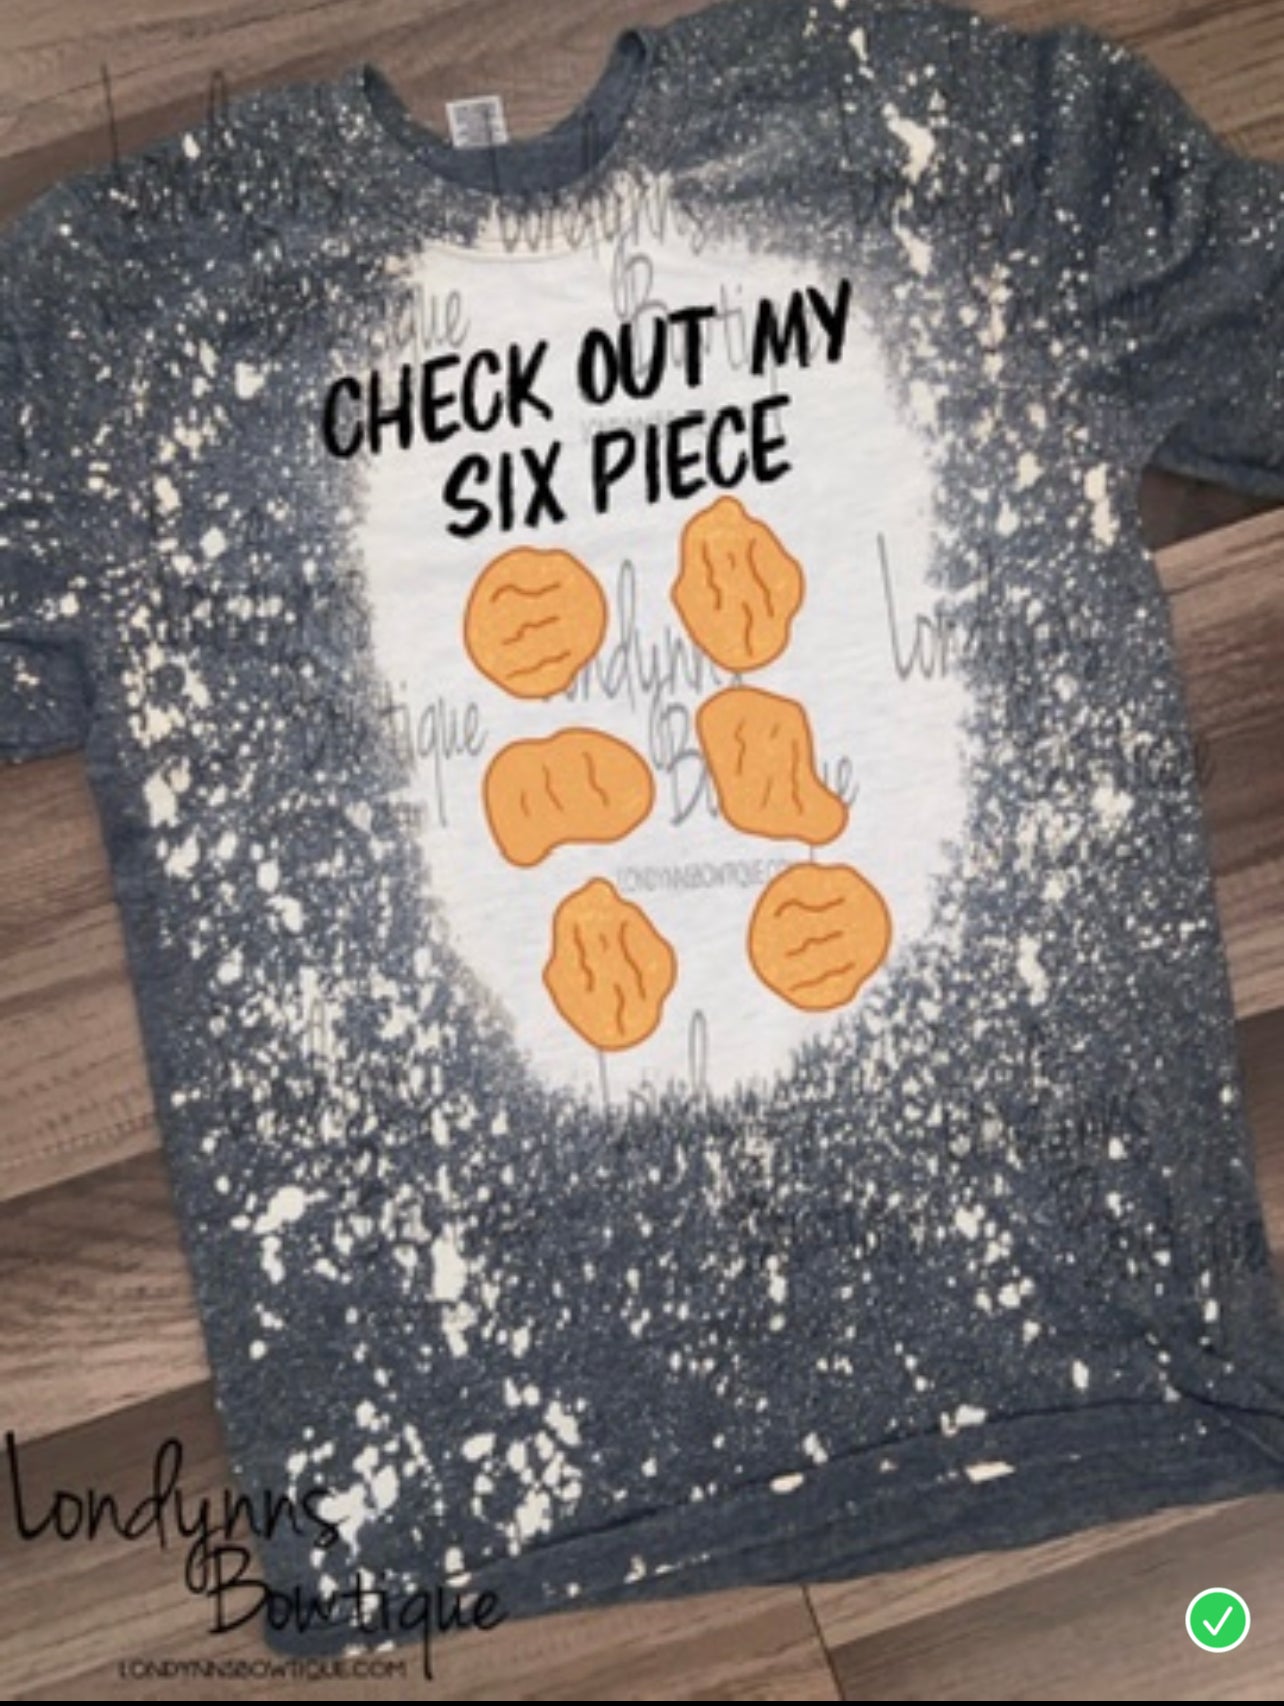 Check out my six piece KIDS Bleached shirts